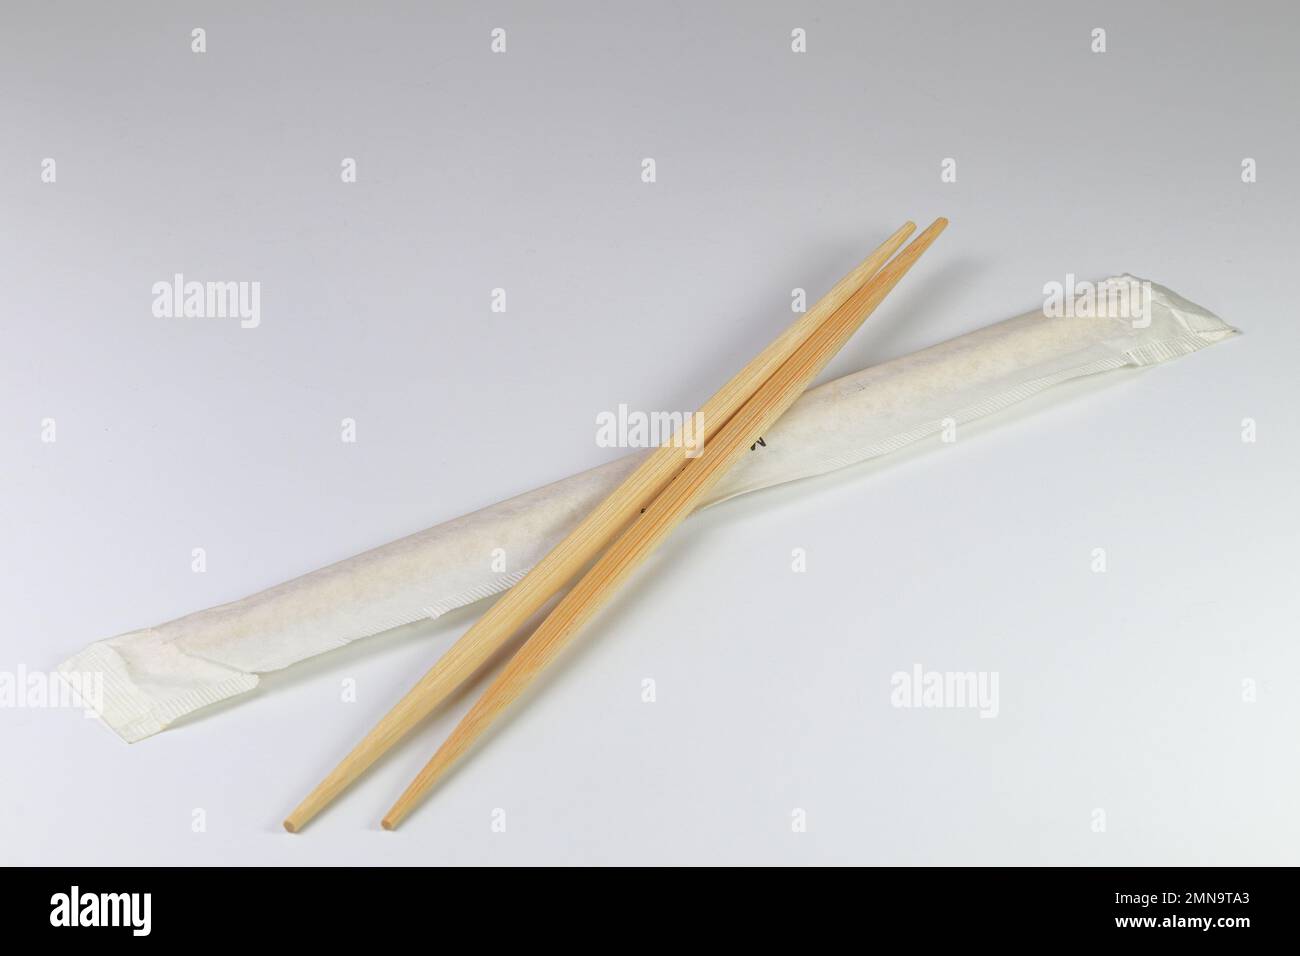 ready-made or disposable Brown bamboo chopsticks with package isolated on white background. Stock Photo